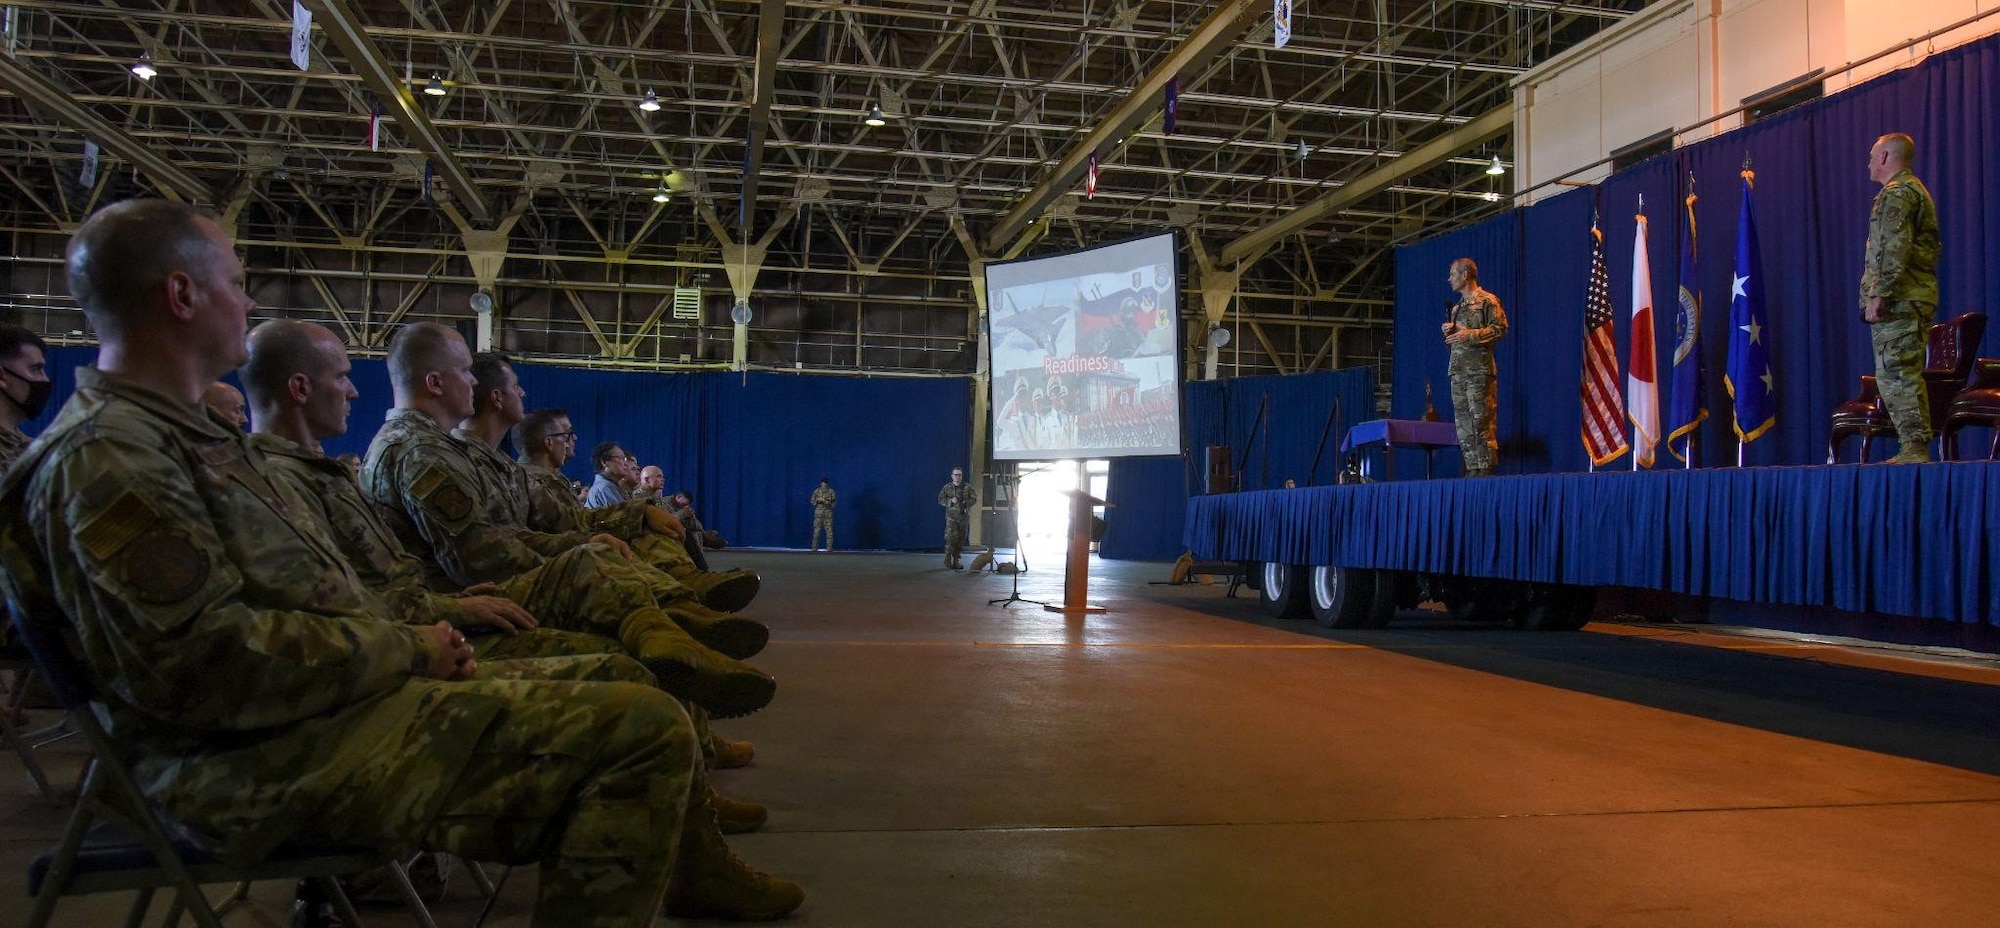 Service members listening to another service member  speaking on a stage.